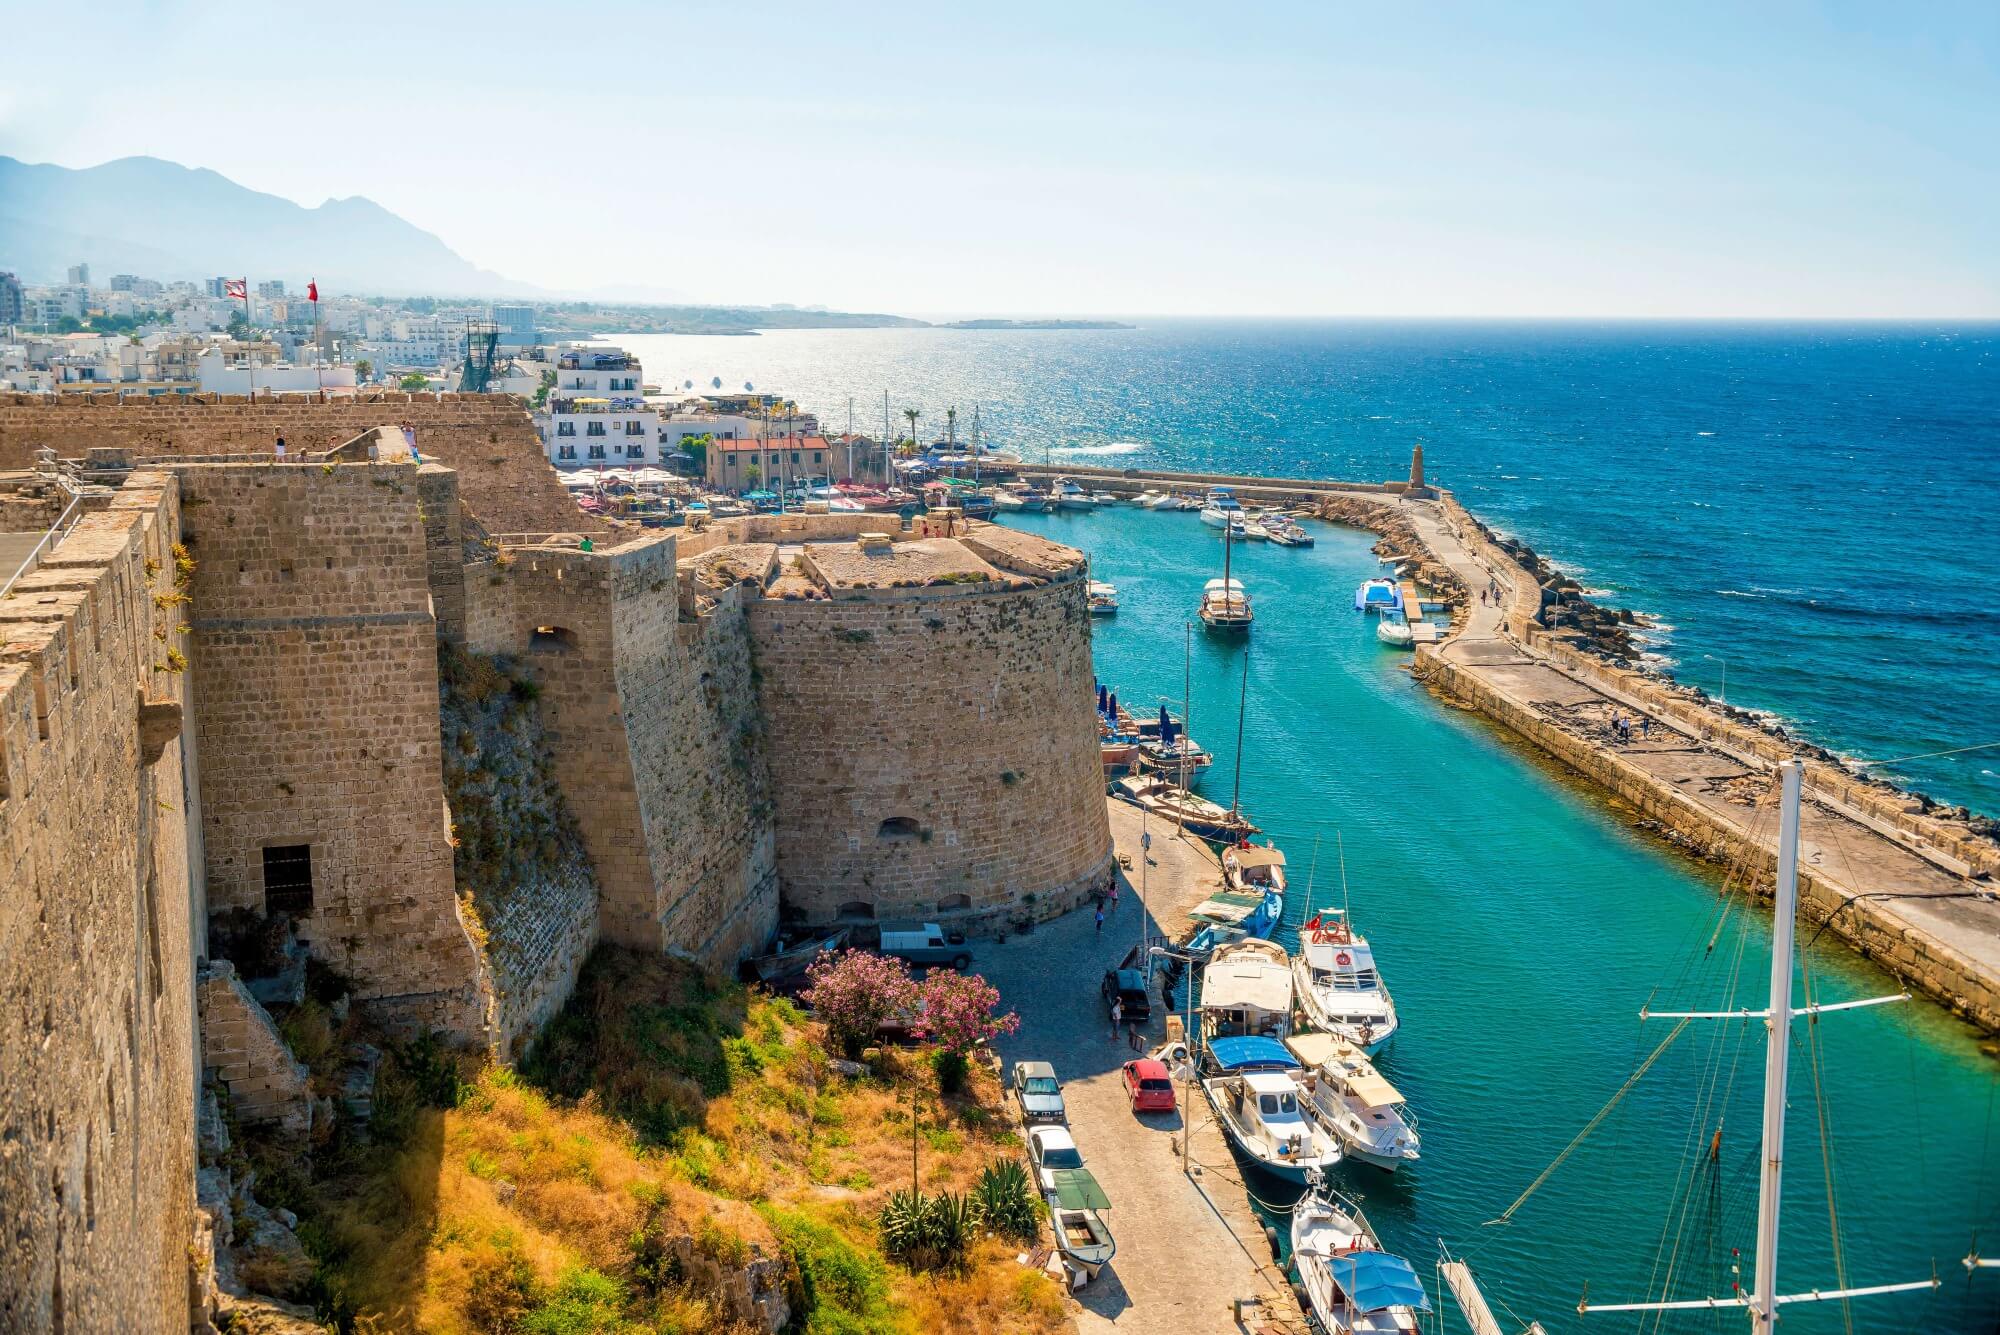 The magnificent Kyrenia Castle adjacent to the historic harbour